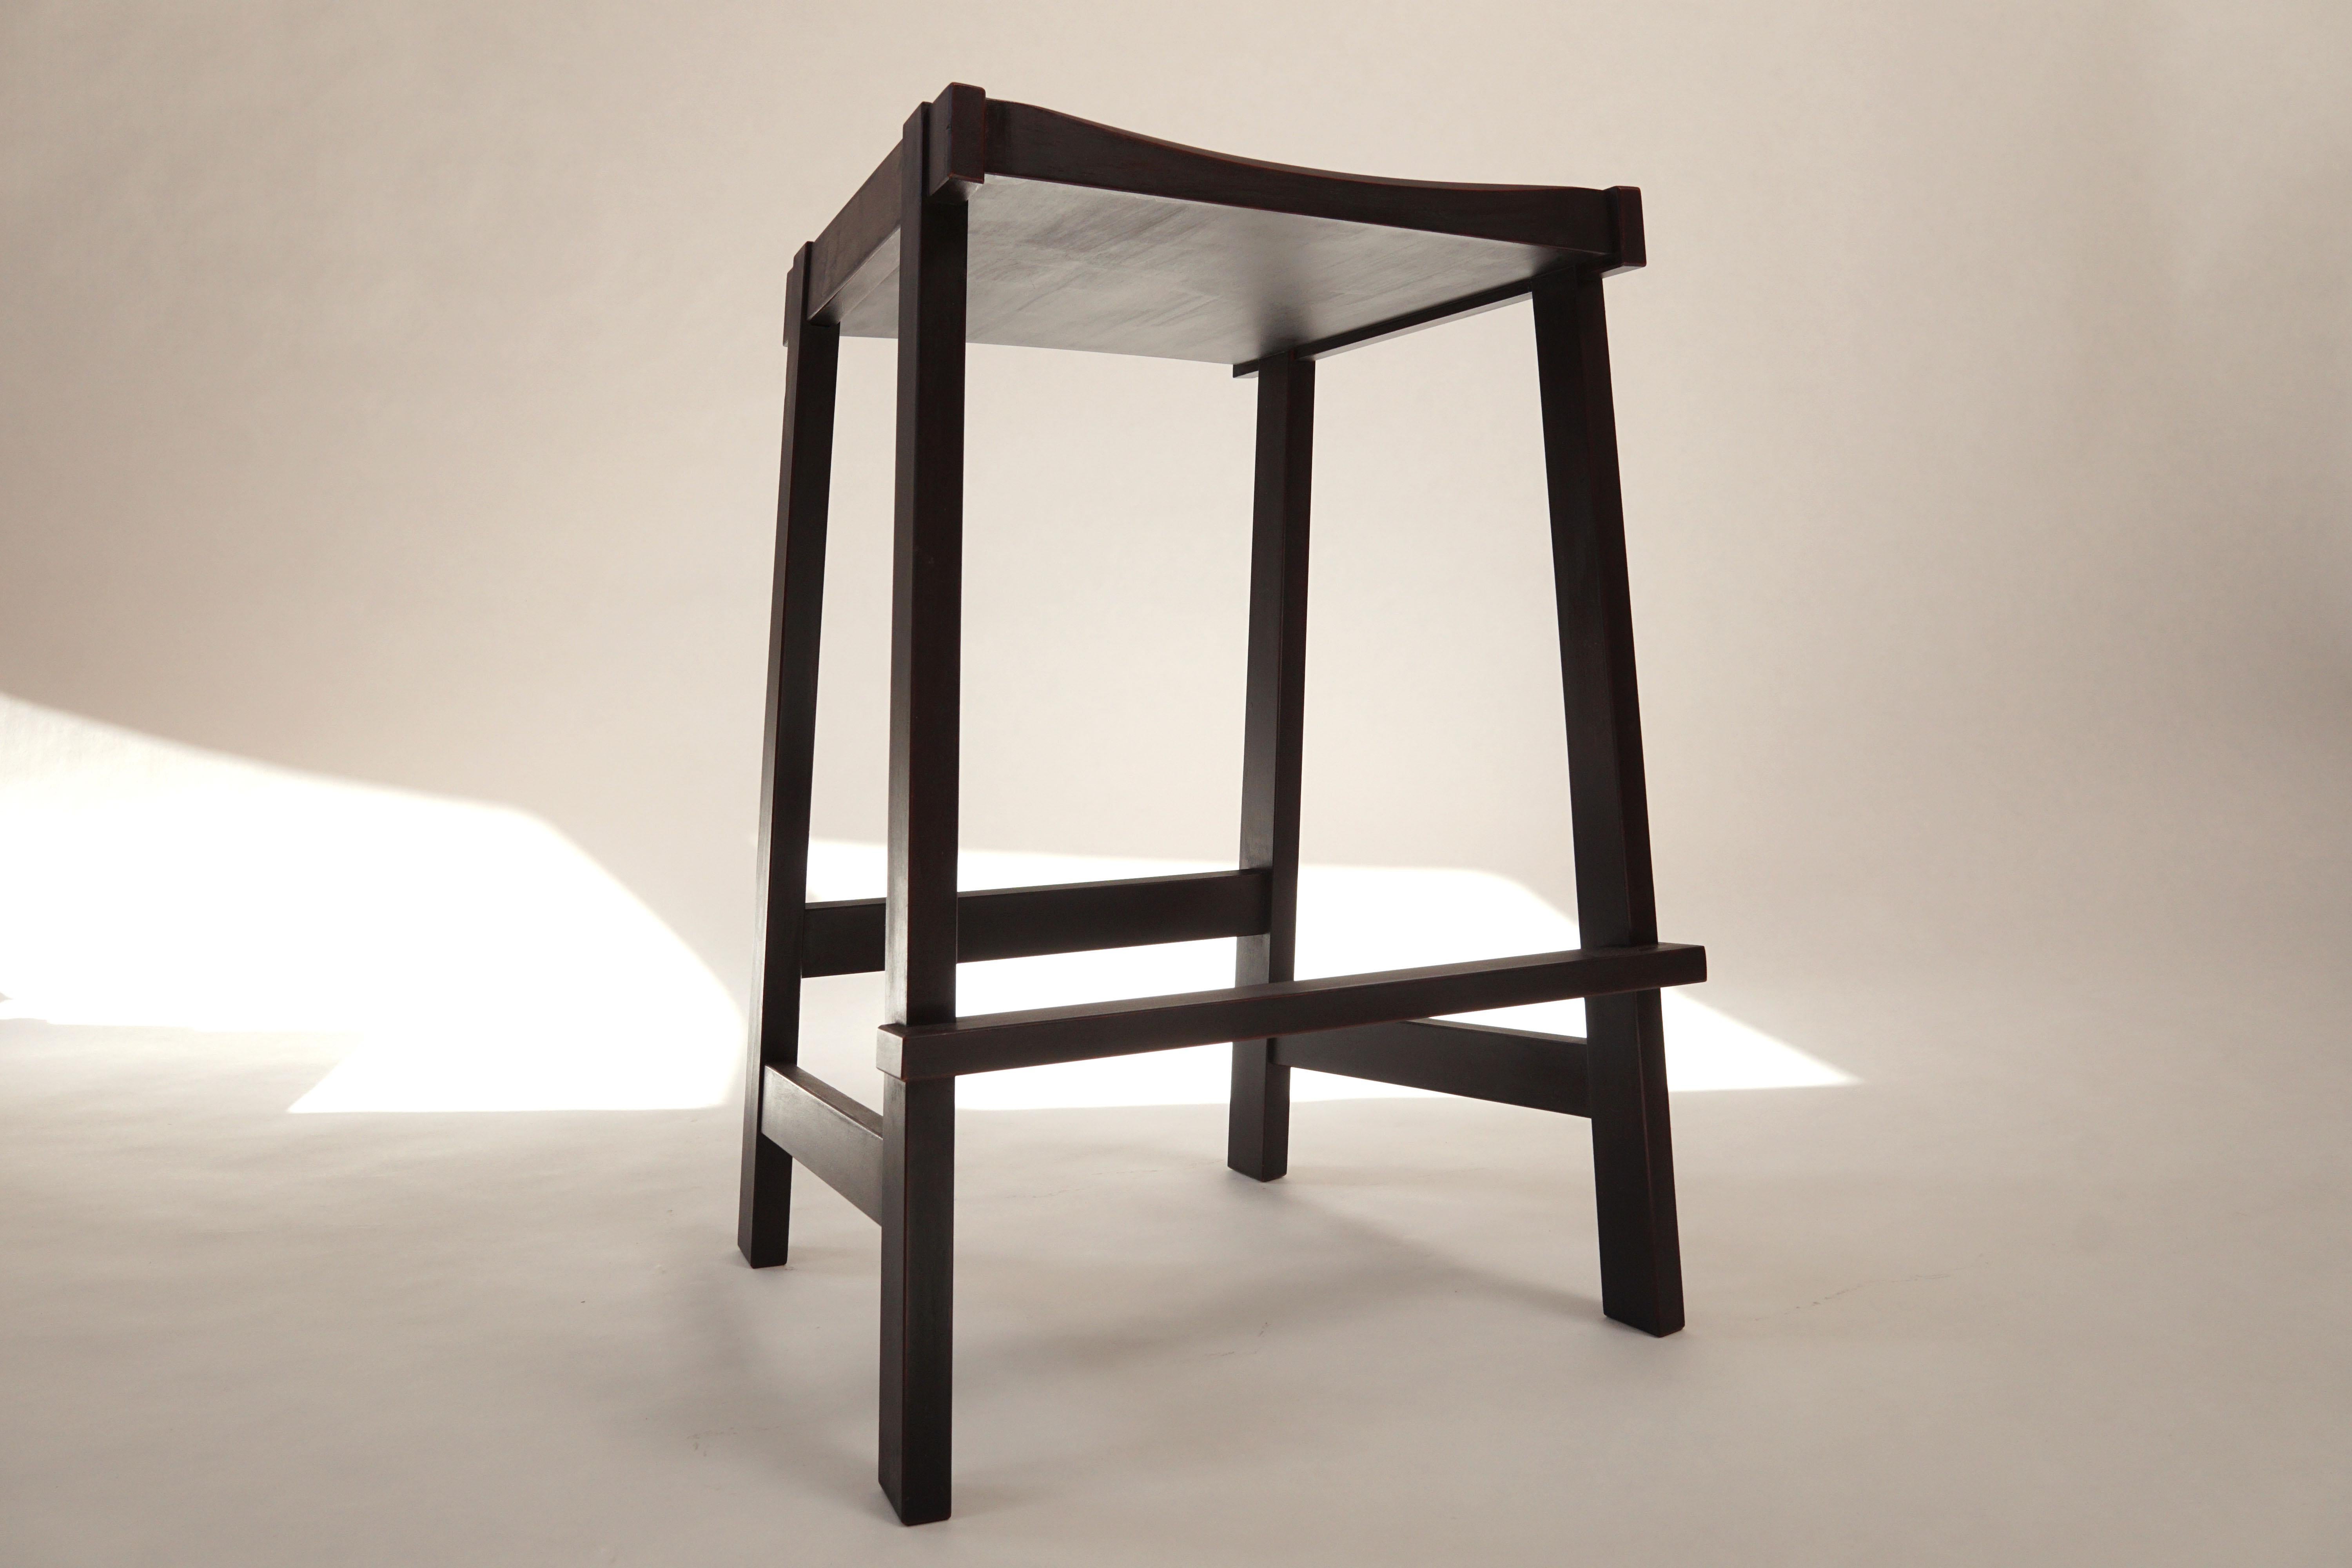 The Montrose Stool, a sharp, bold, angular form. Made from solid hardwoods with a carved seat for comfort. Constructed with lots of exposed joinery and interesting details. The top of the legs are bridle joints, let into the seat. The foot rest is